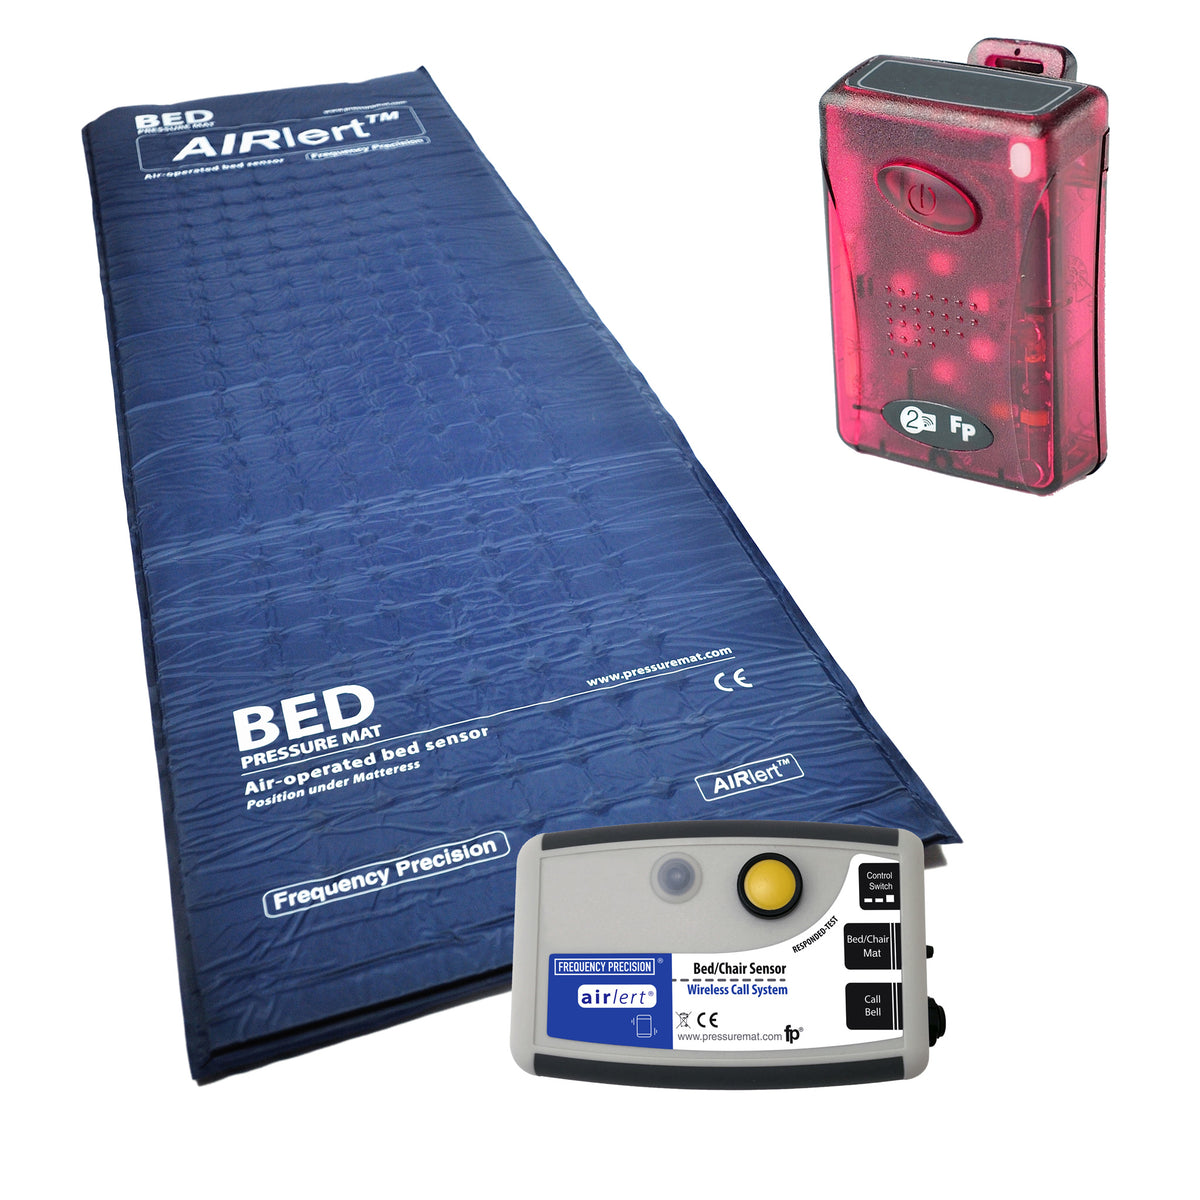 Product image displaying a Wireless Bed Pressure Mat &amp; Pager set